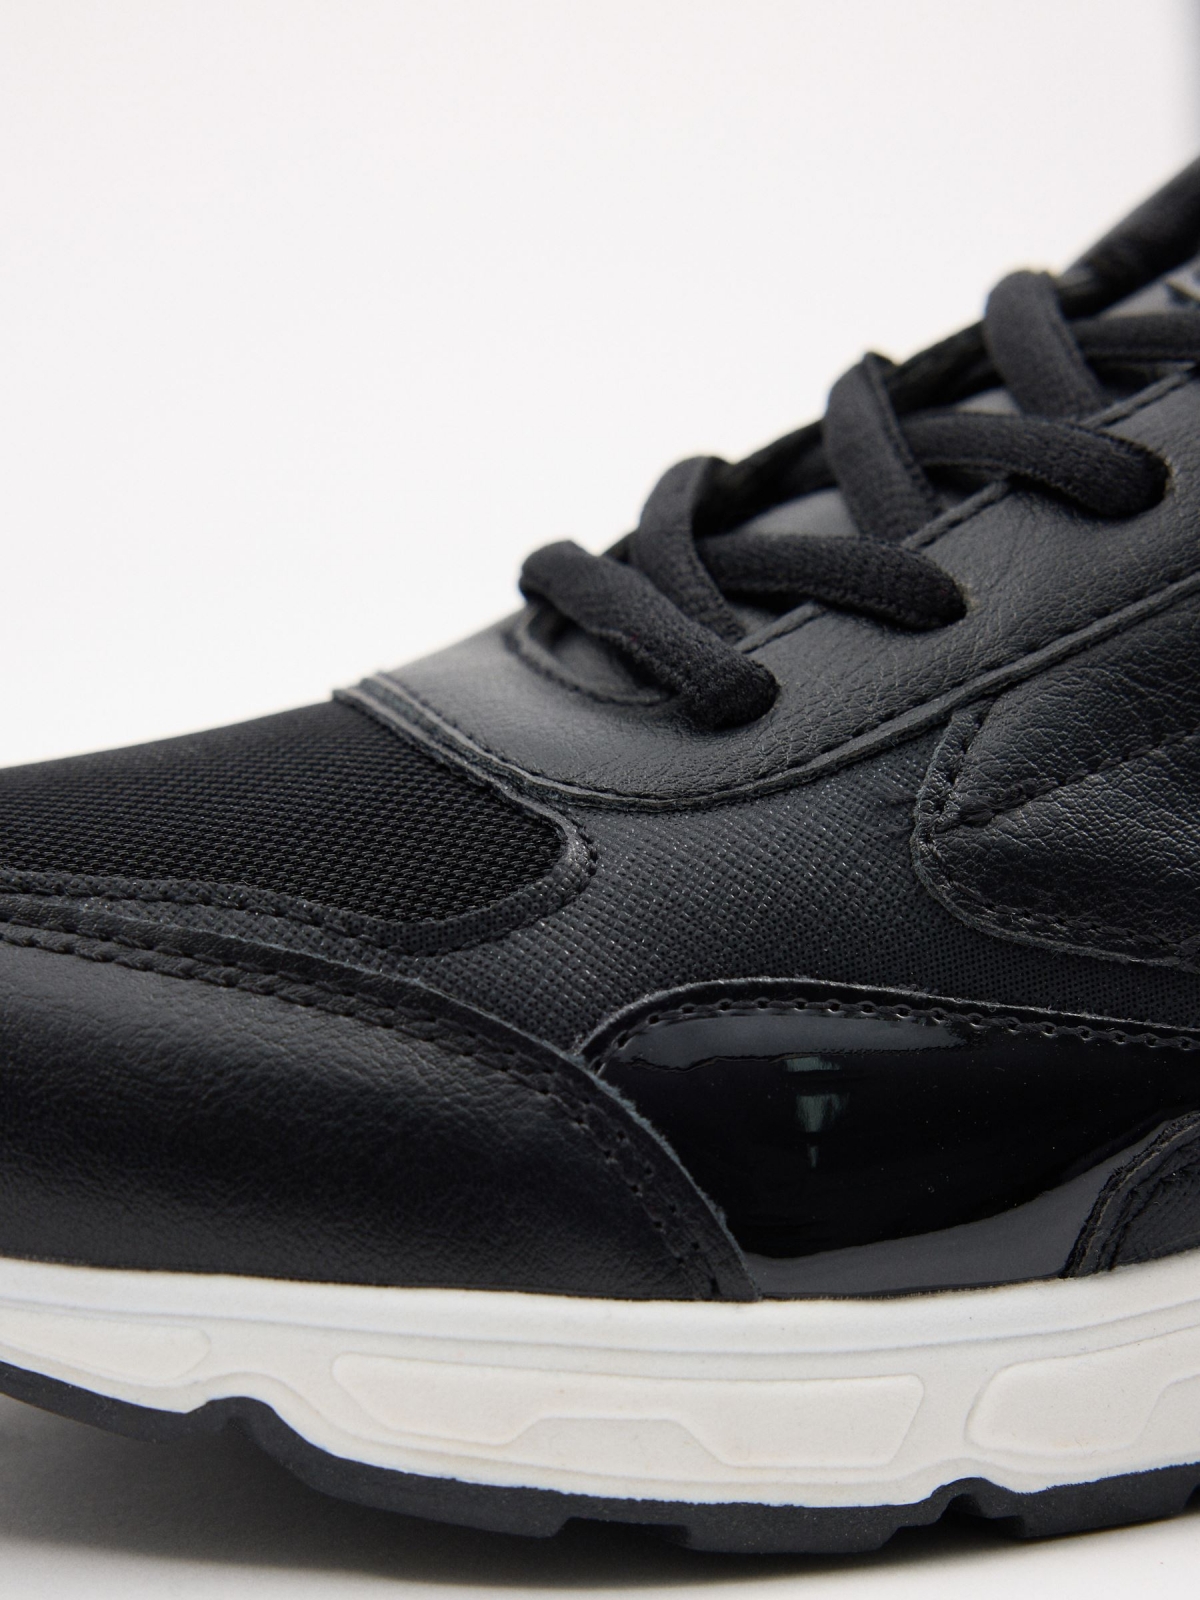 Black sneaker with air chamber black detail view